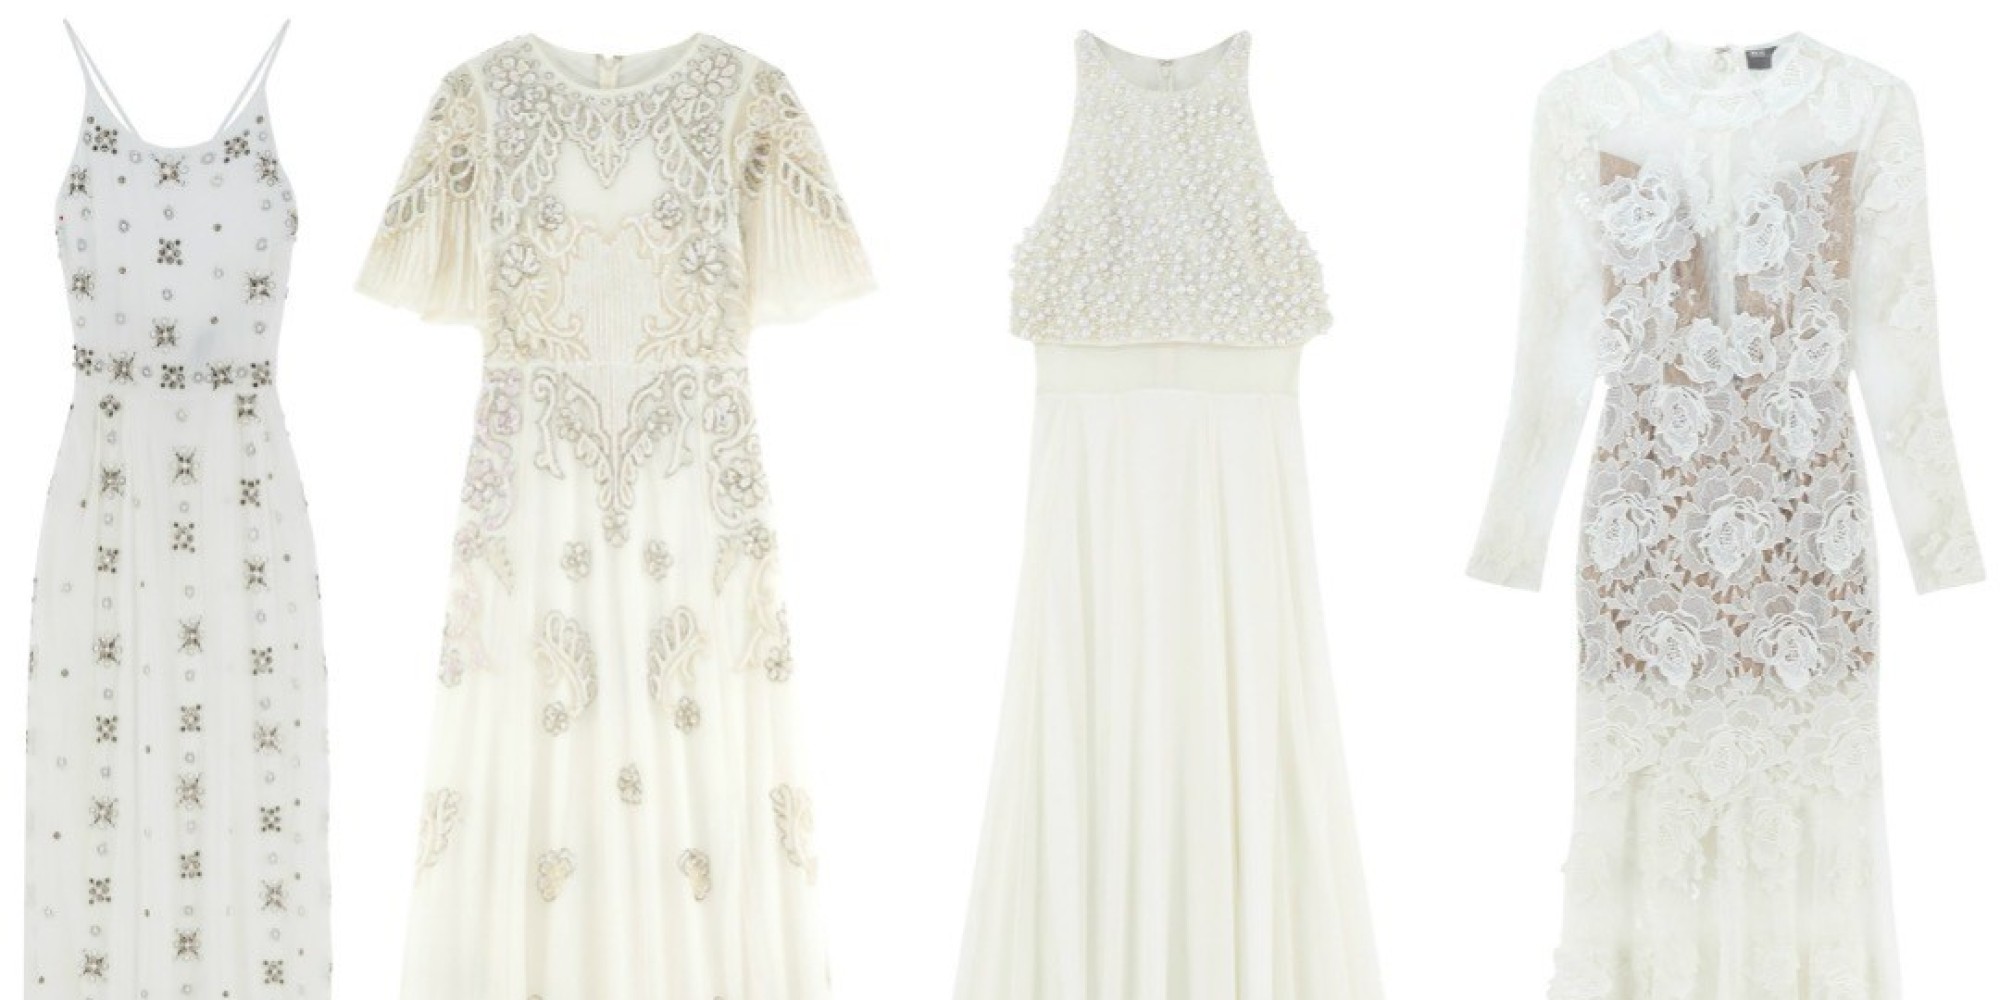 ASOS Bridal Collection: Fashion Site To Launch New Wedding Dress ...